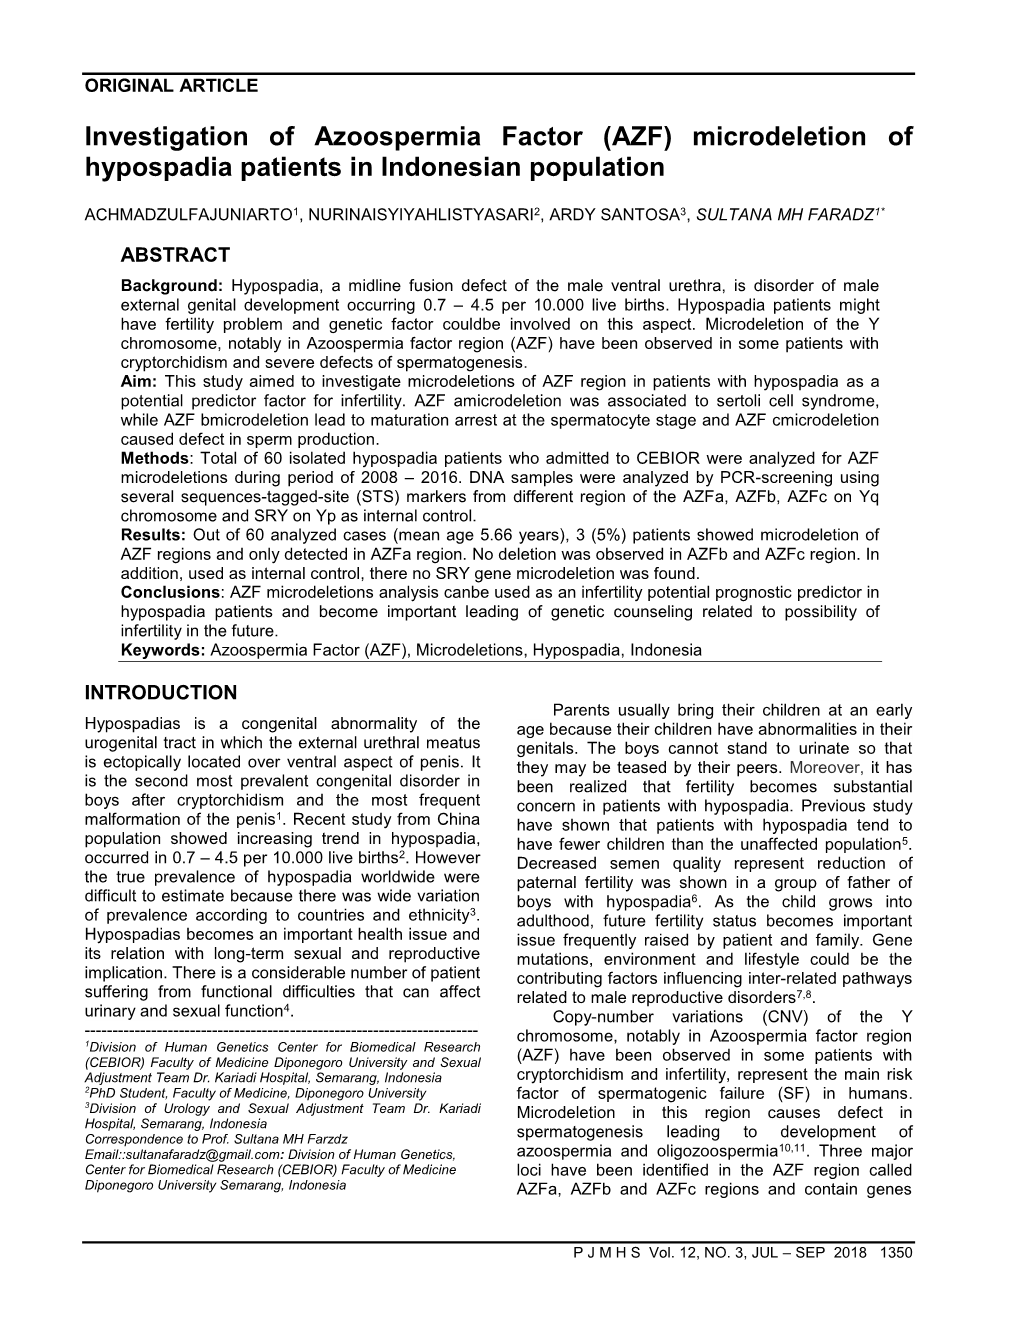 (AZF) Microdeletion of Hypospadia Patients in Indonesian Population